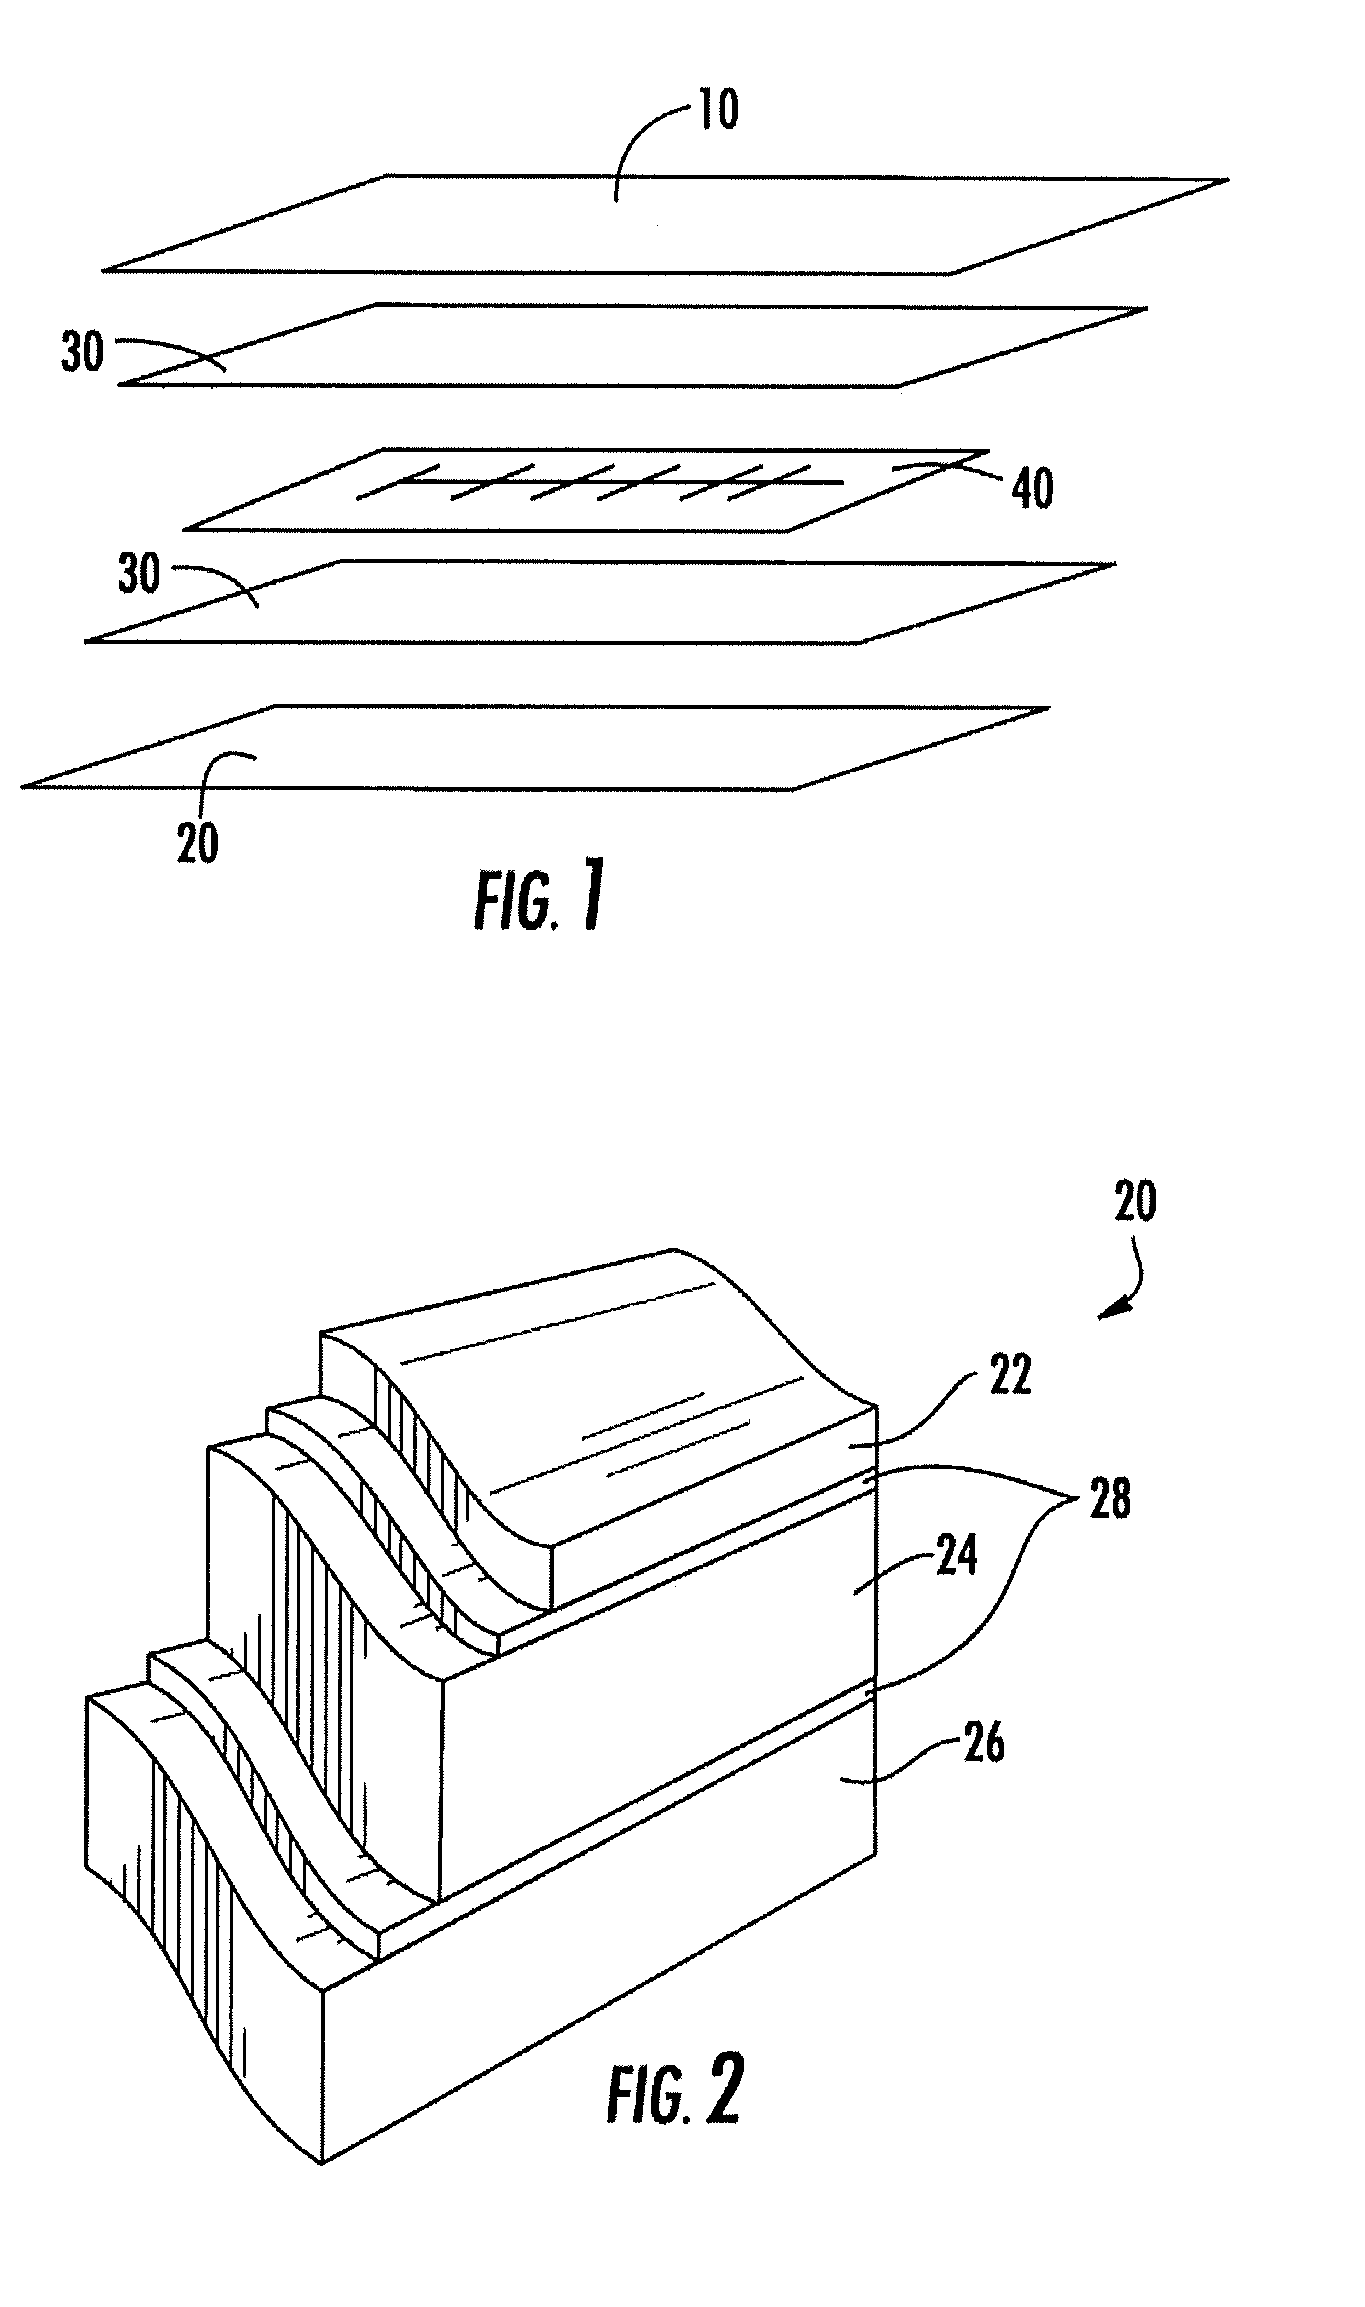 Heat dissipating protective sheets and encapsulant for photovoltaic modules